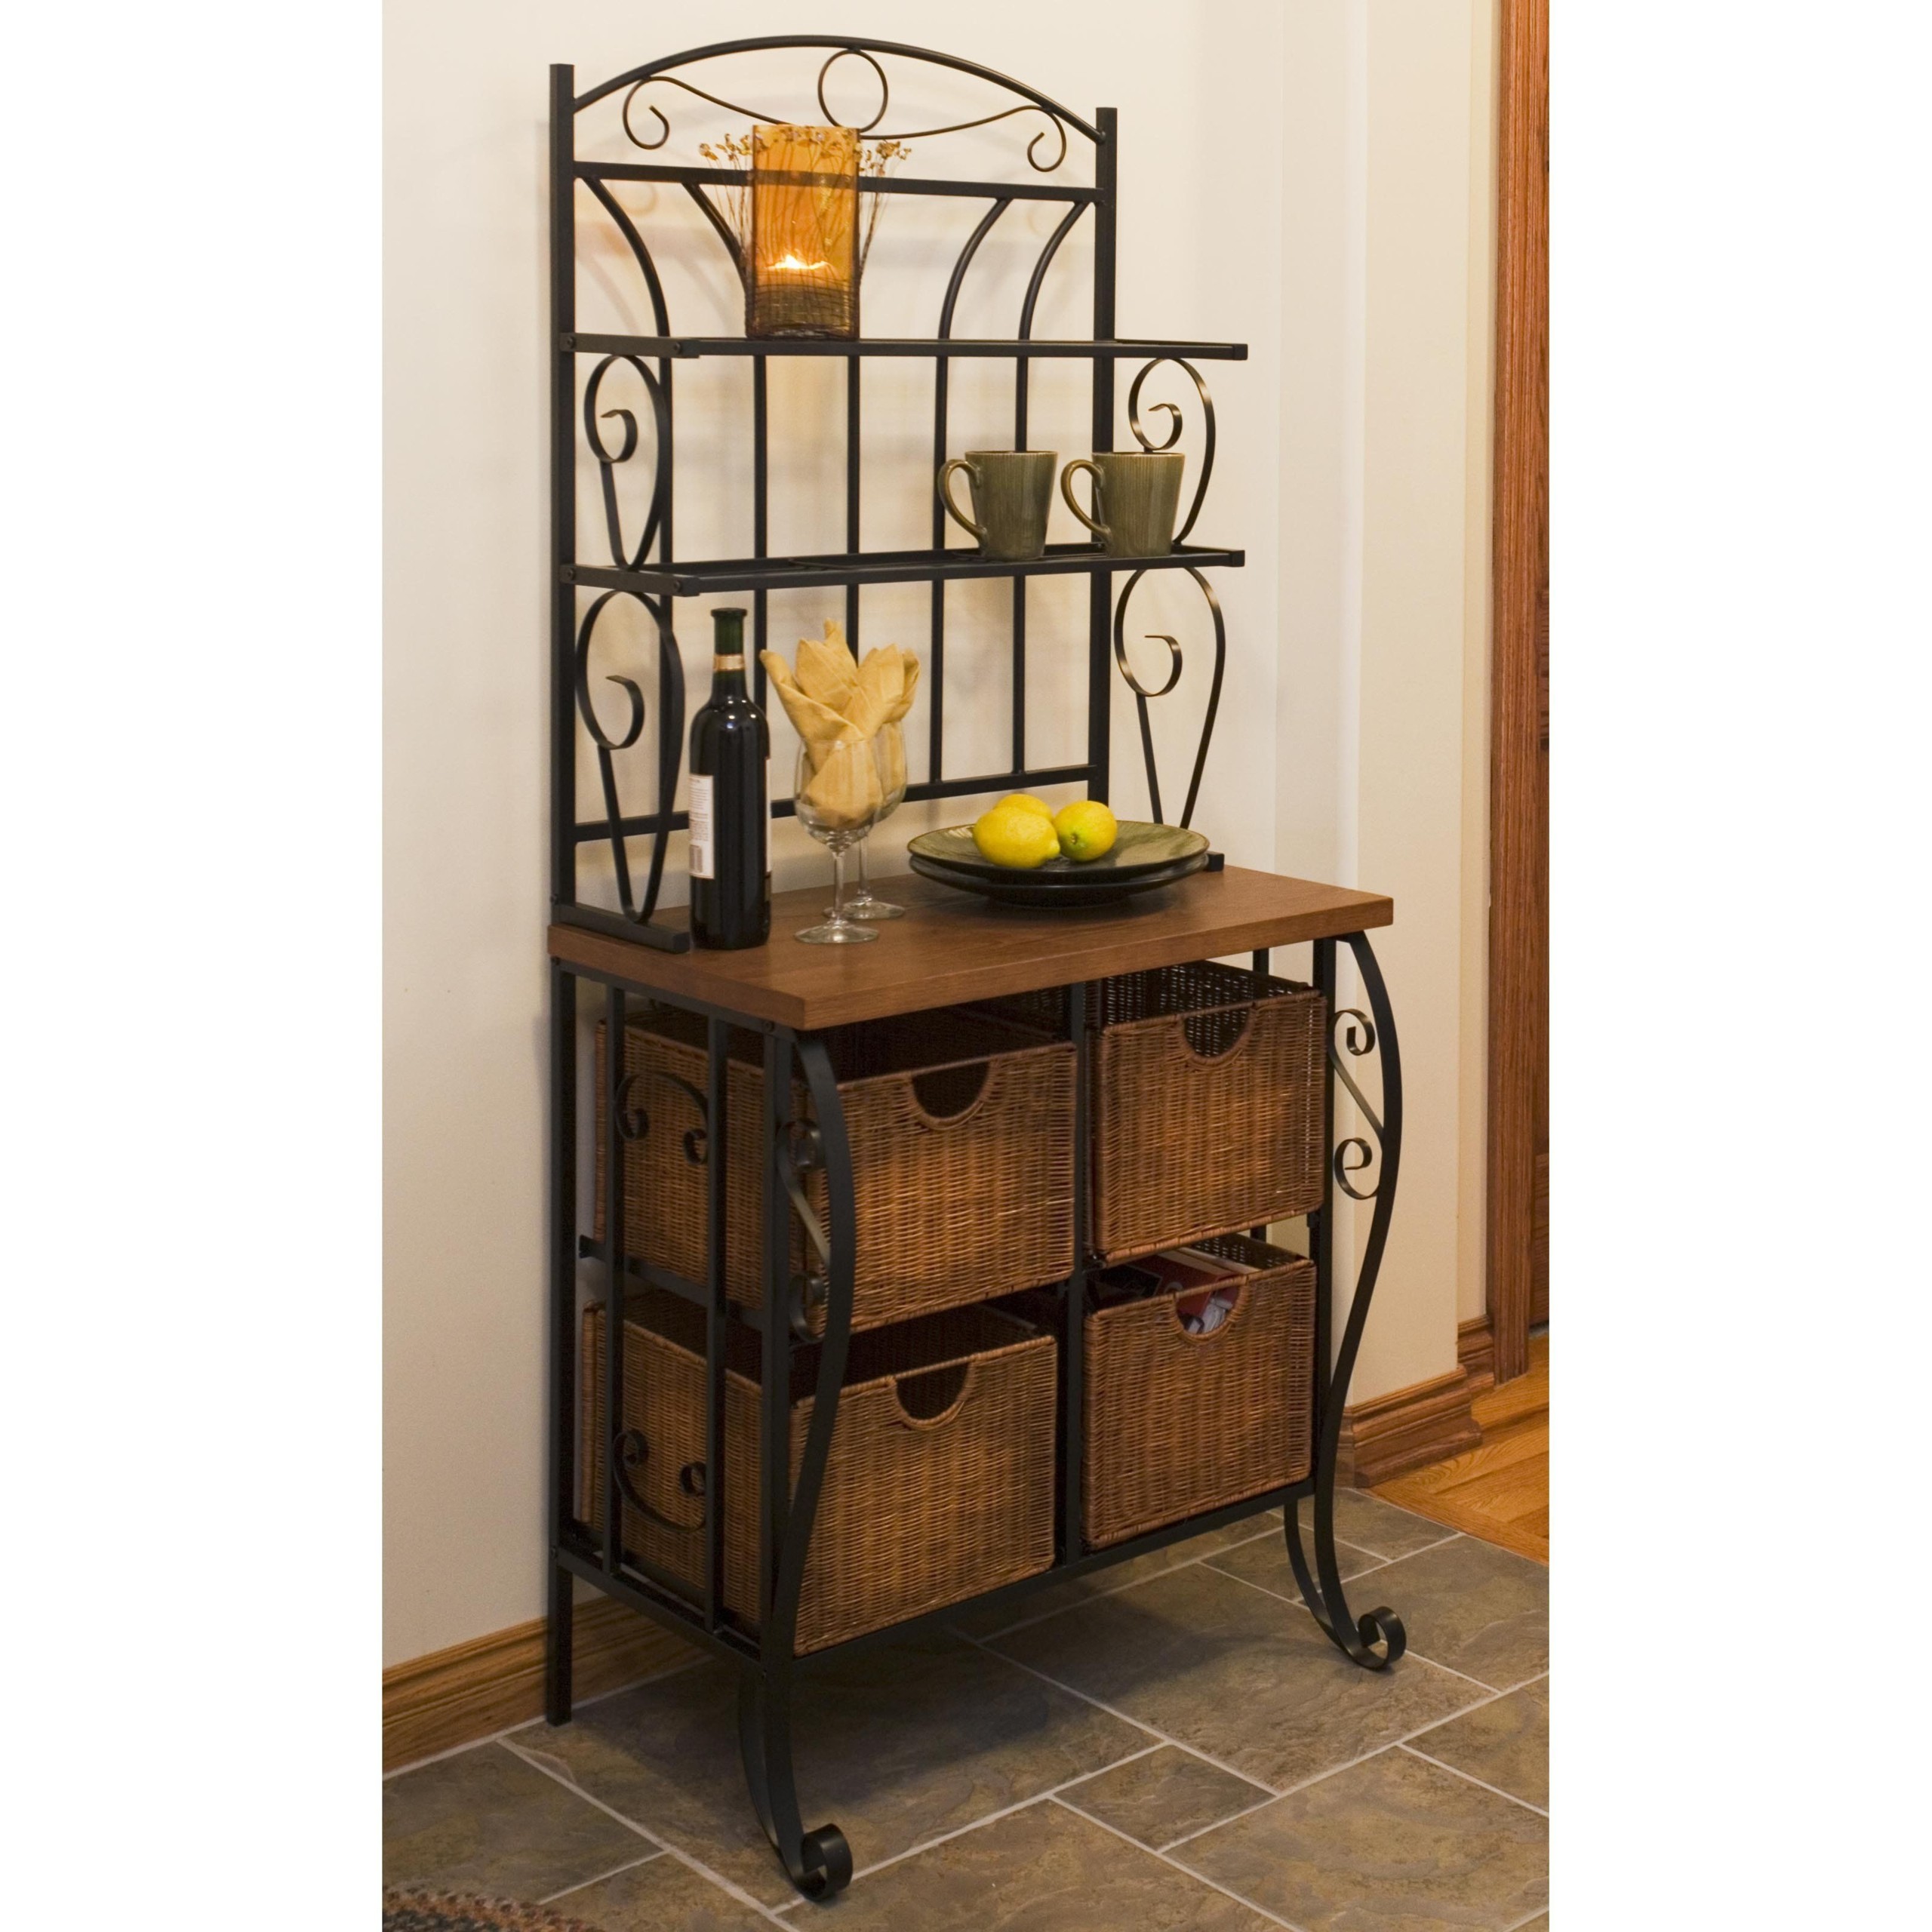 Iron wicker bakers rack give your home a contemporary